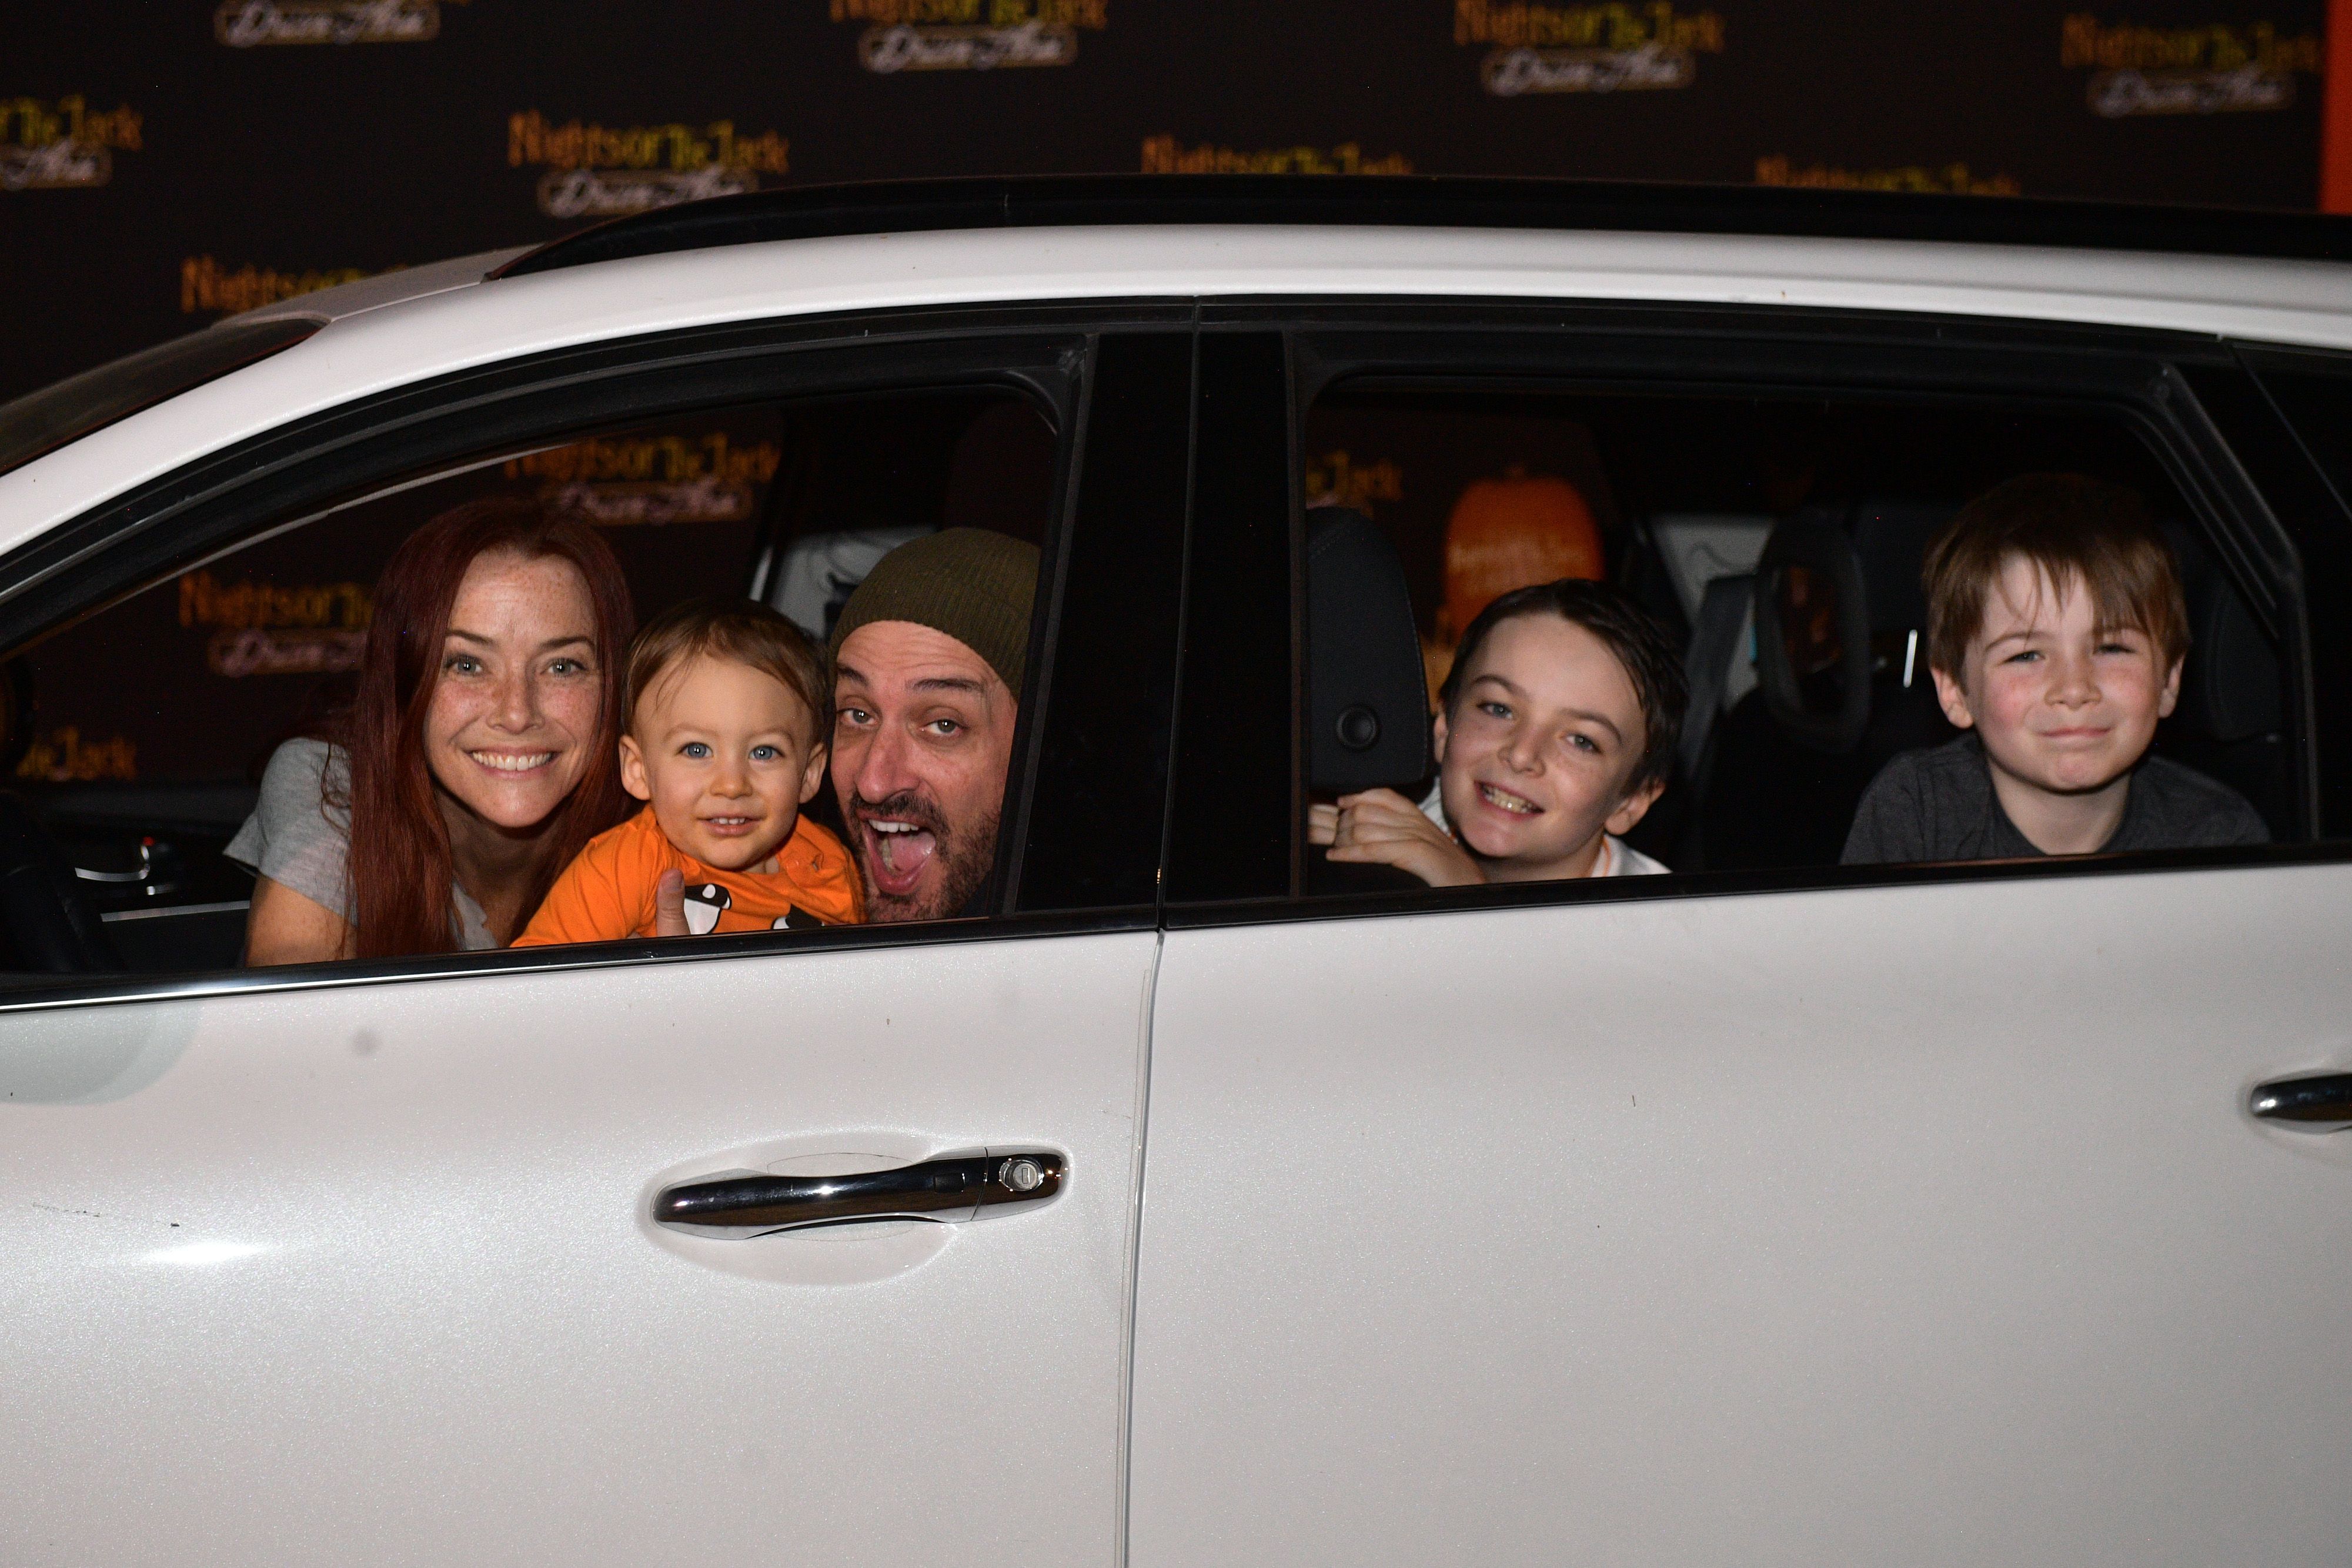 Annie Wersching and Stephen Full with their children attend "Nights of the Jack Friends & Family Night 2020" at King Gillette Ranch on September 30, 2020, in Calabasas, California. | Source: Getty Images